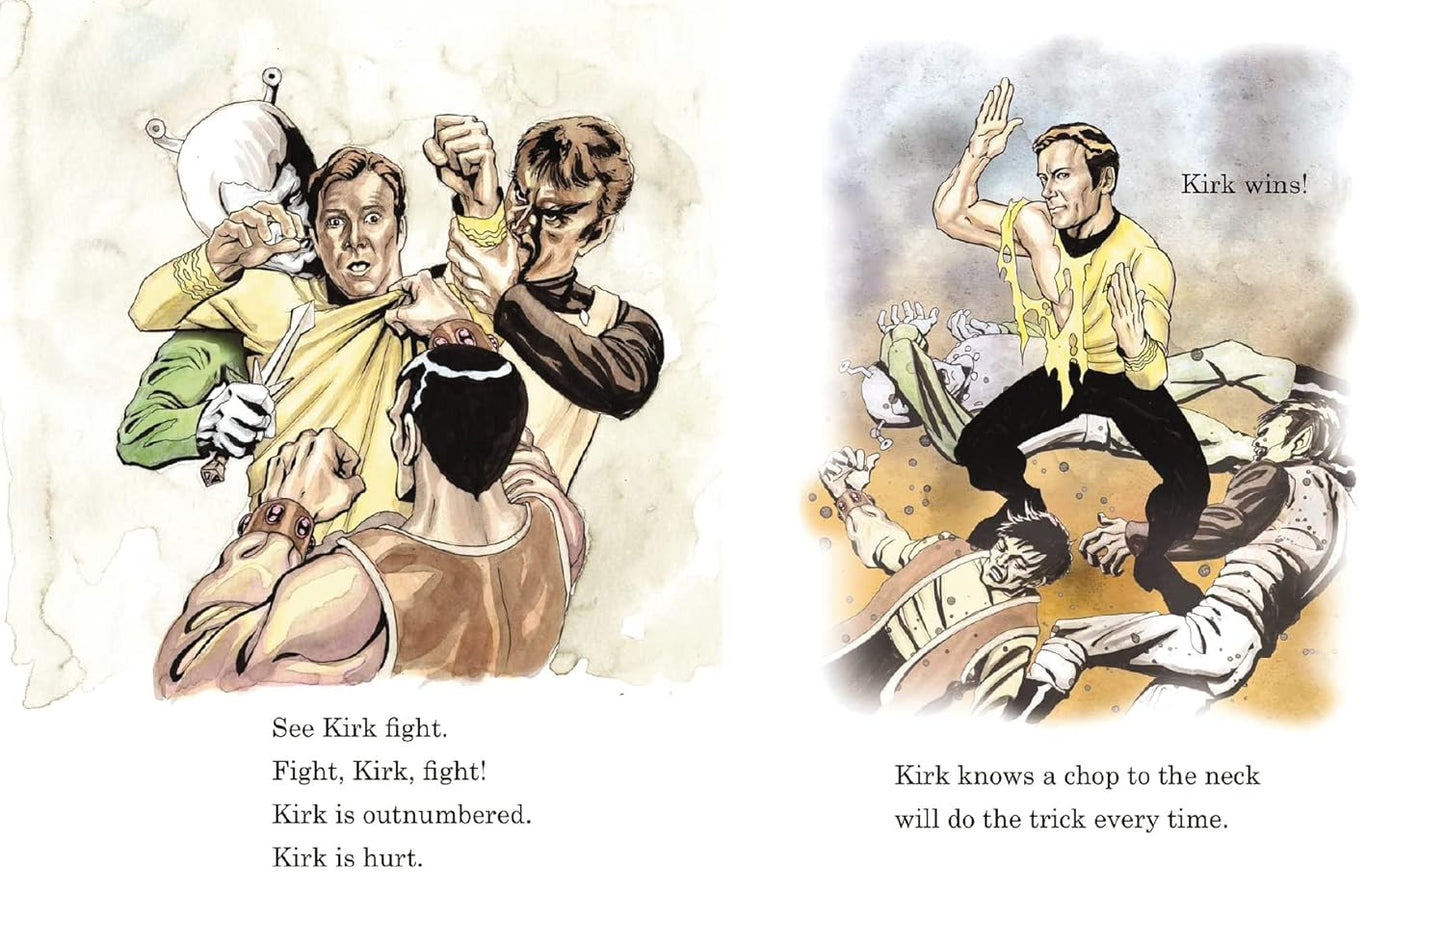 Fun with Kirk and Spock: Watch Kirk and Spock Go Boldly Where No Parody has Gone Before! (Star Trek Gifts, Book for Trekkies, Movie Books, Humor Gifts, Funny Books)